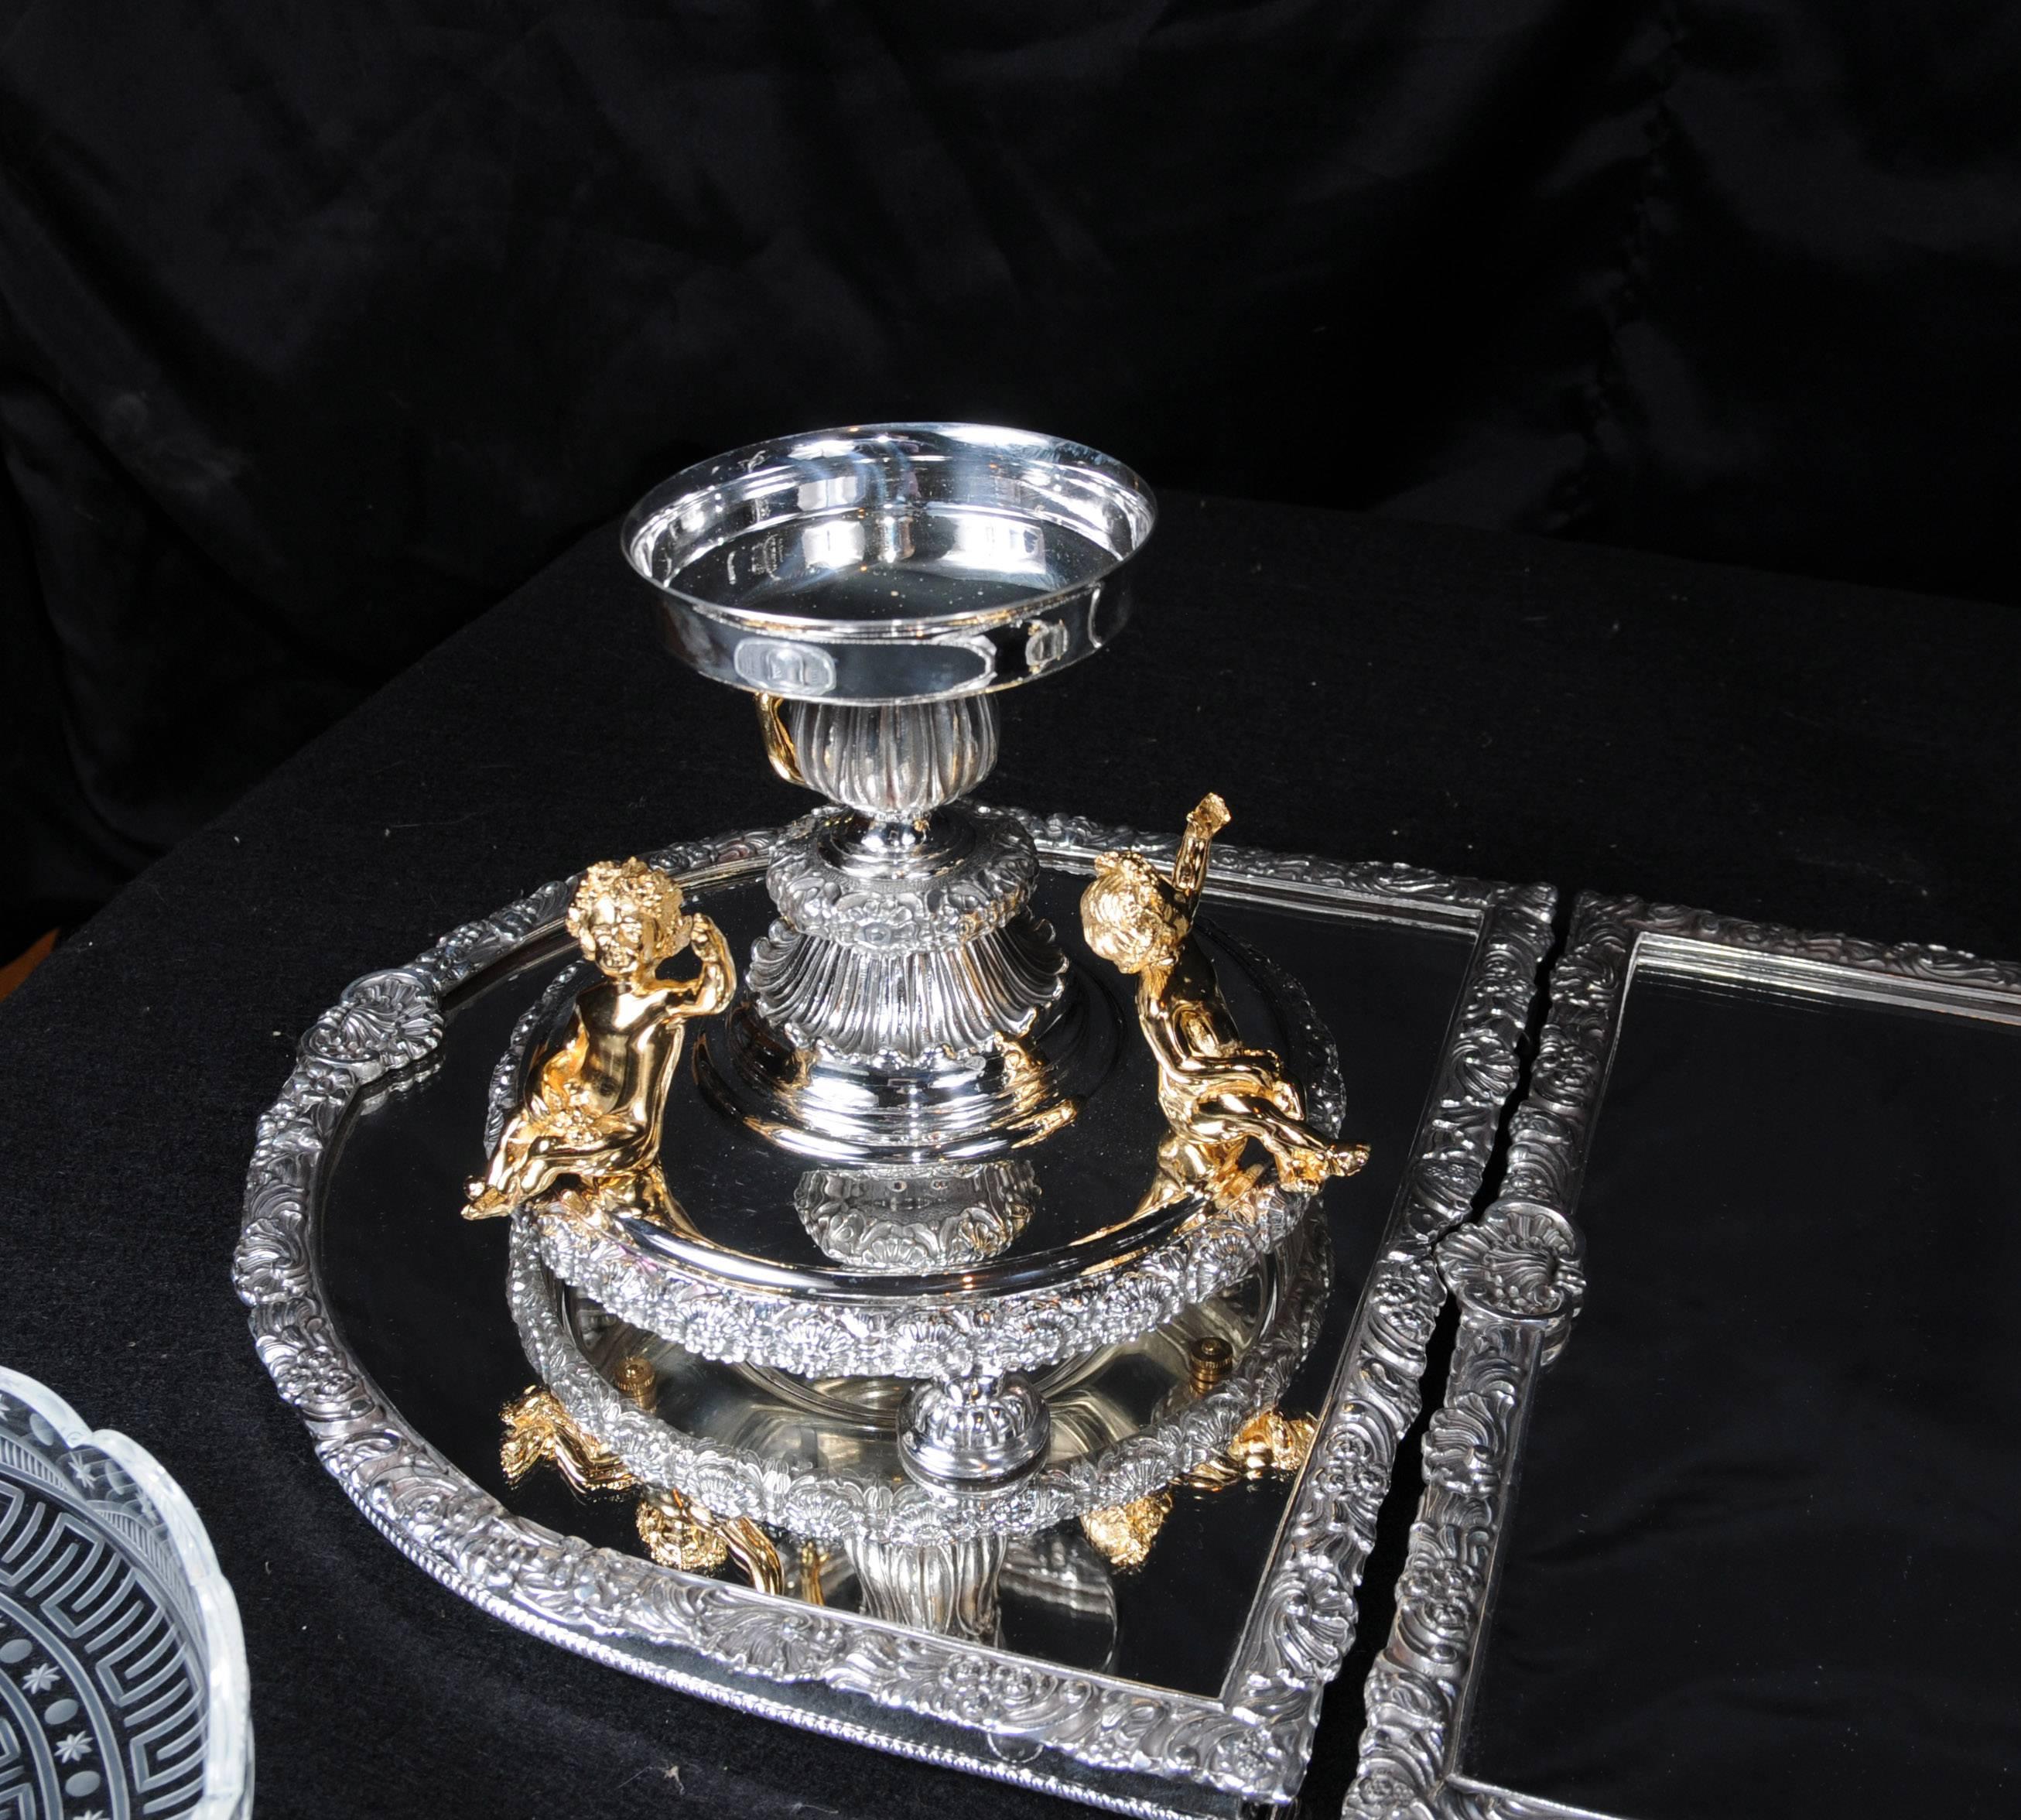 Elkington Silver Plate Centrepiece Epergne Cherub Candelabra In Excellent Condition For Sale In Potters Bar, Herts